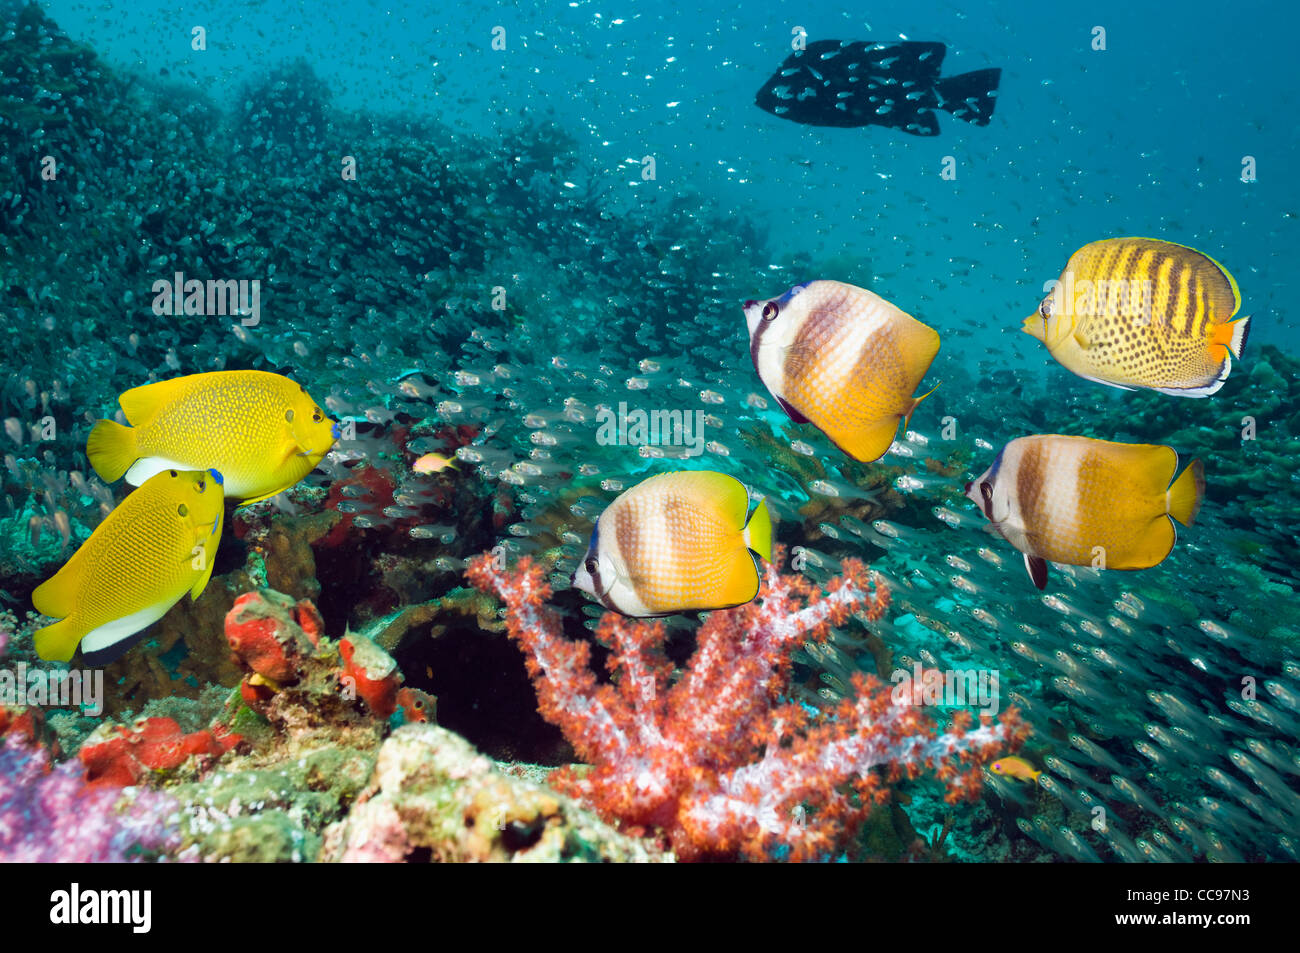 Klein's butterflyfish, Three-spot angelfish and a Spot-banded buterflyfish over coral reef with soft corals and cardinalfish Stock Photo